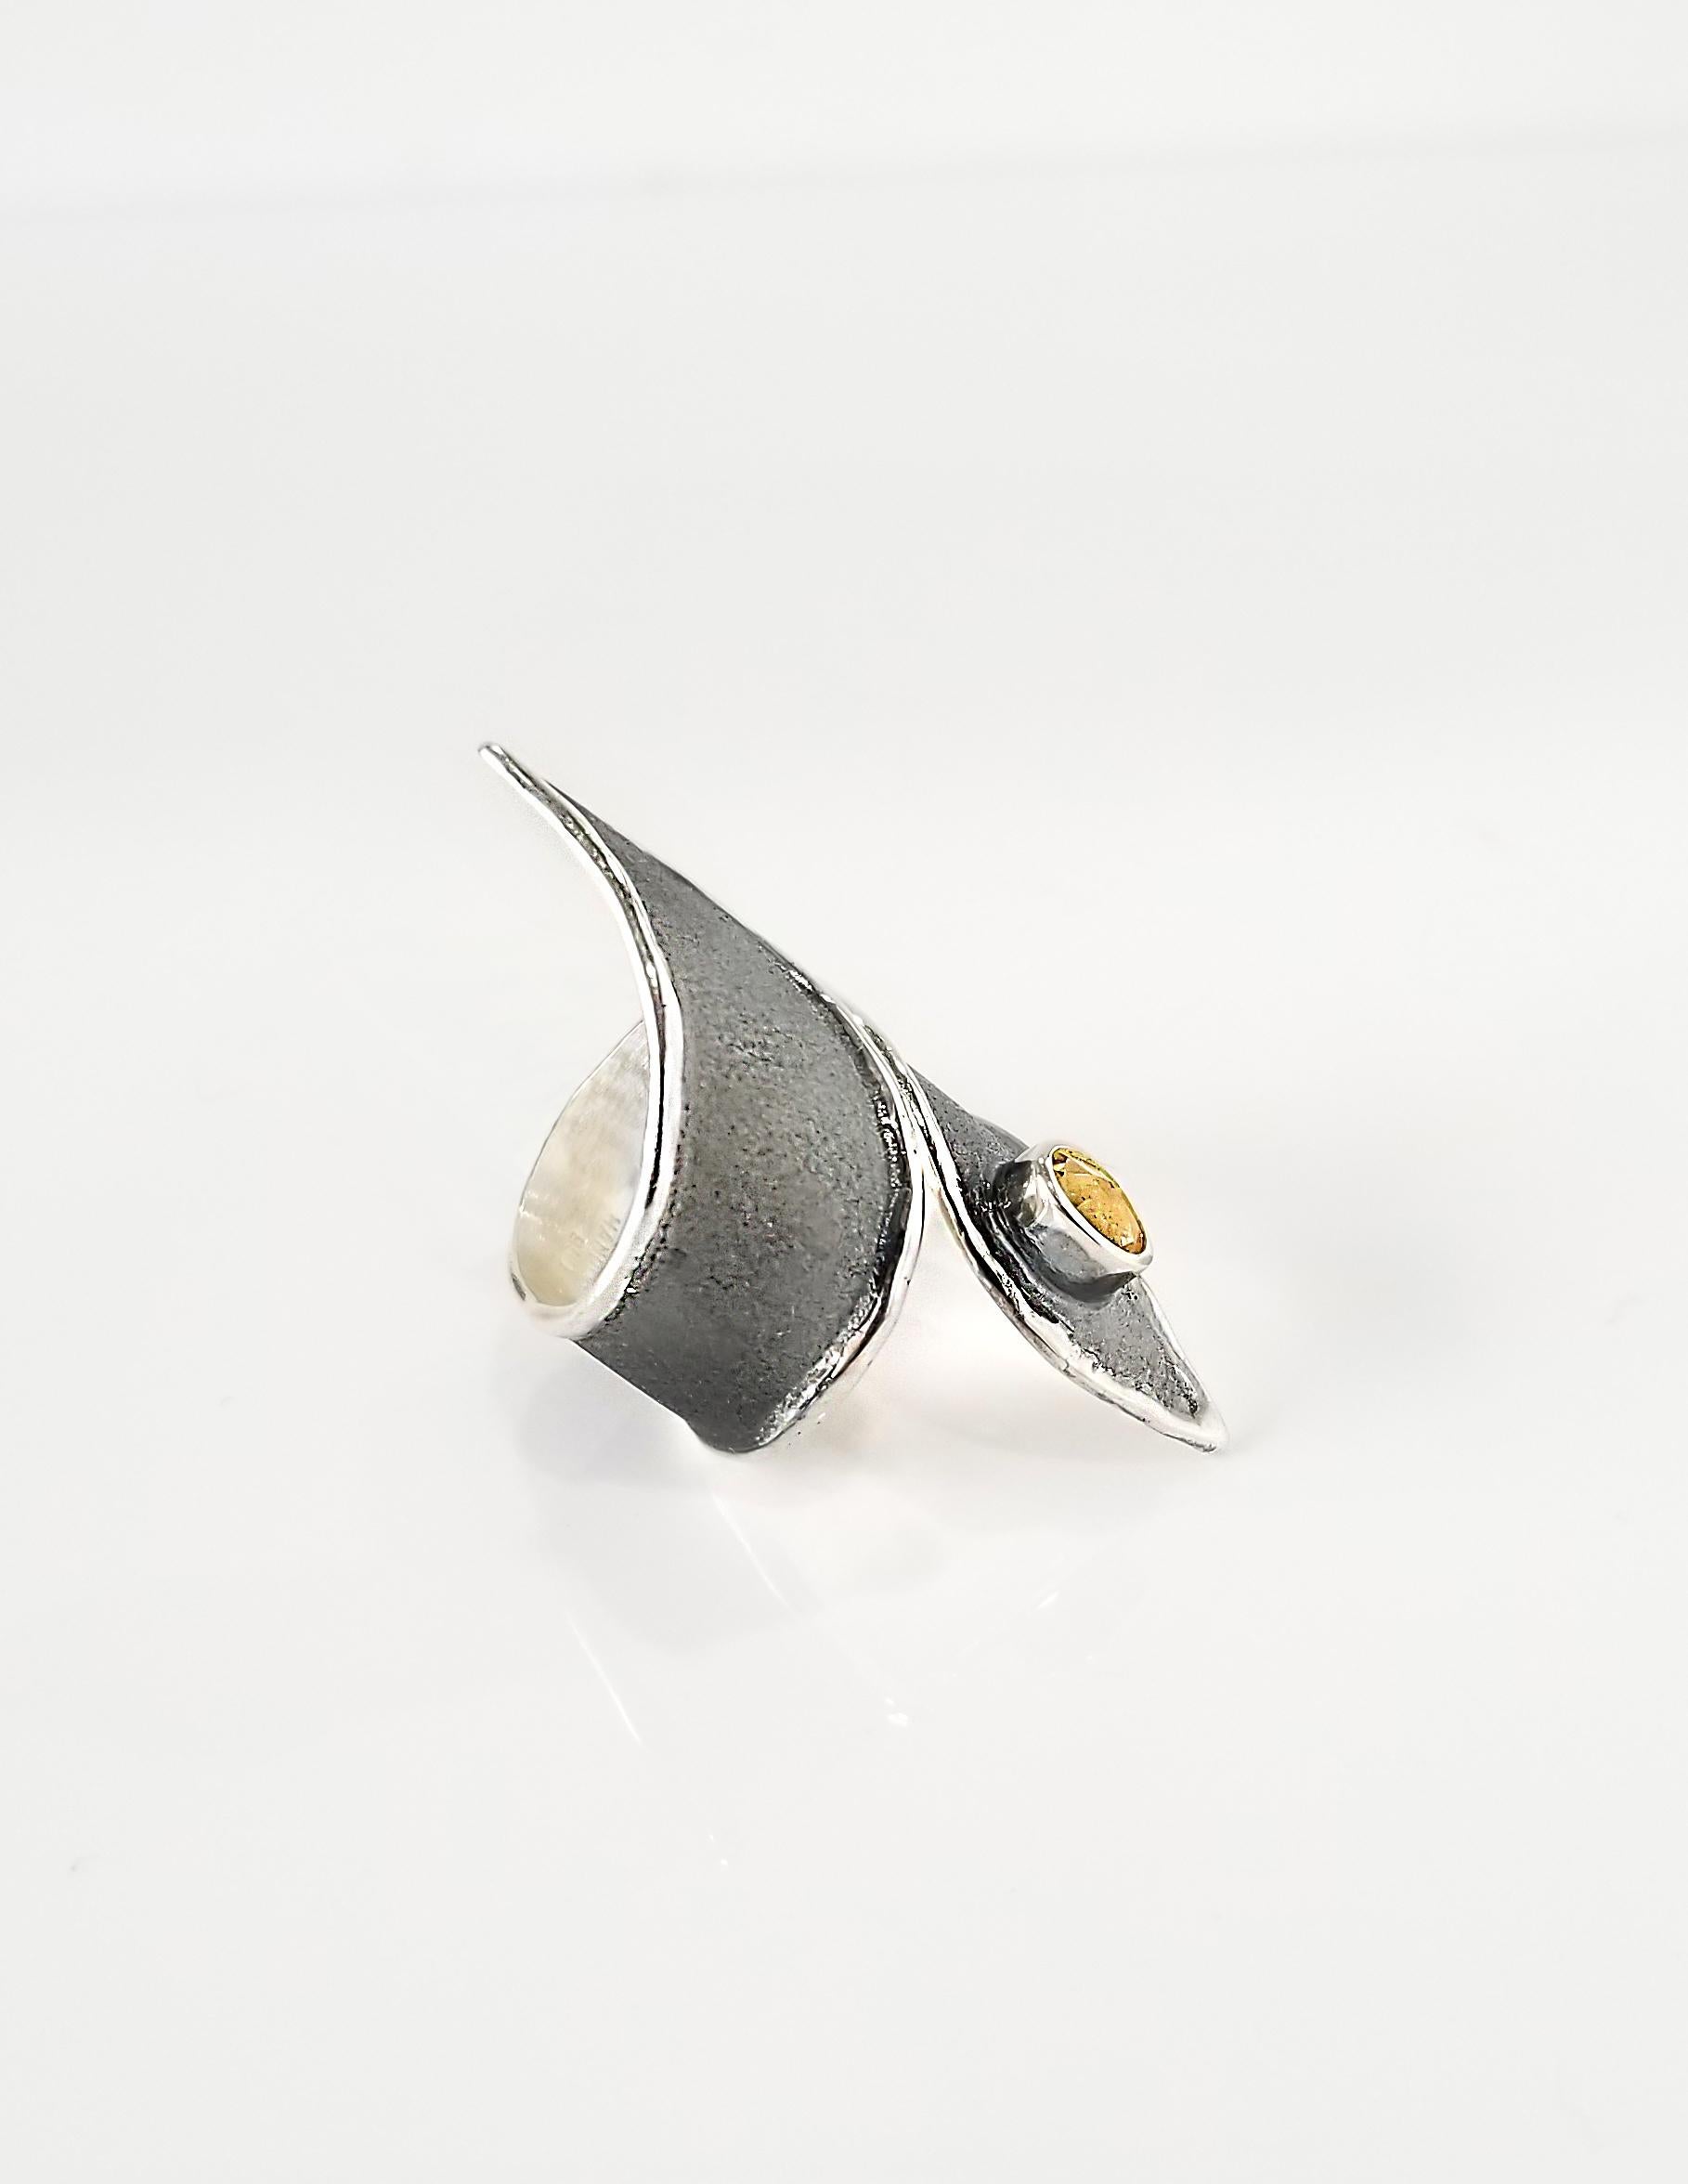 Yianni Creations 100% Handmade Ring from Fine Silver. Ring feature0.45 Carat Oval Citrine contrasting with unique oxidized Rhodium background. The ring is complemented by unique techniques of craftsmanship - brushed texture and nature-inspired